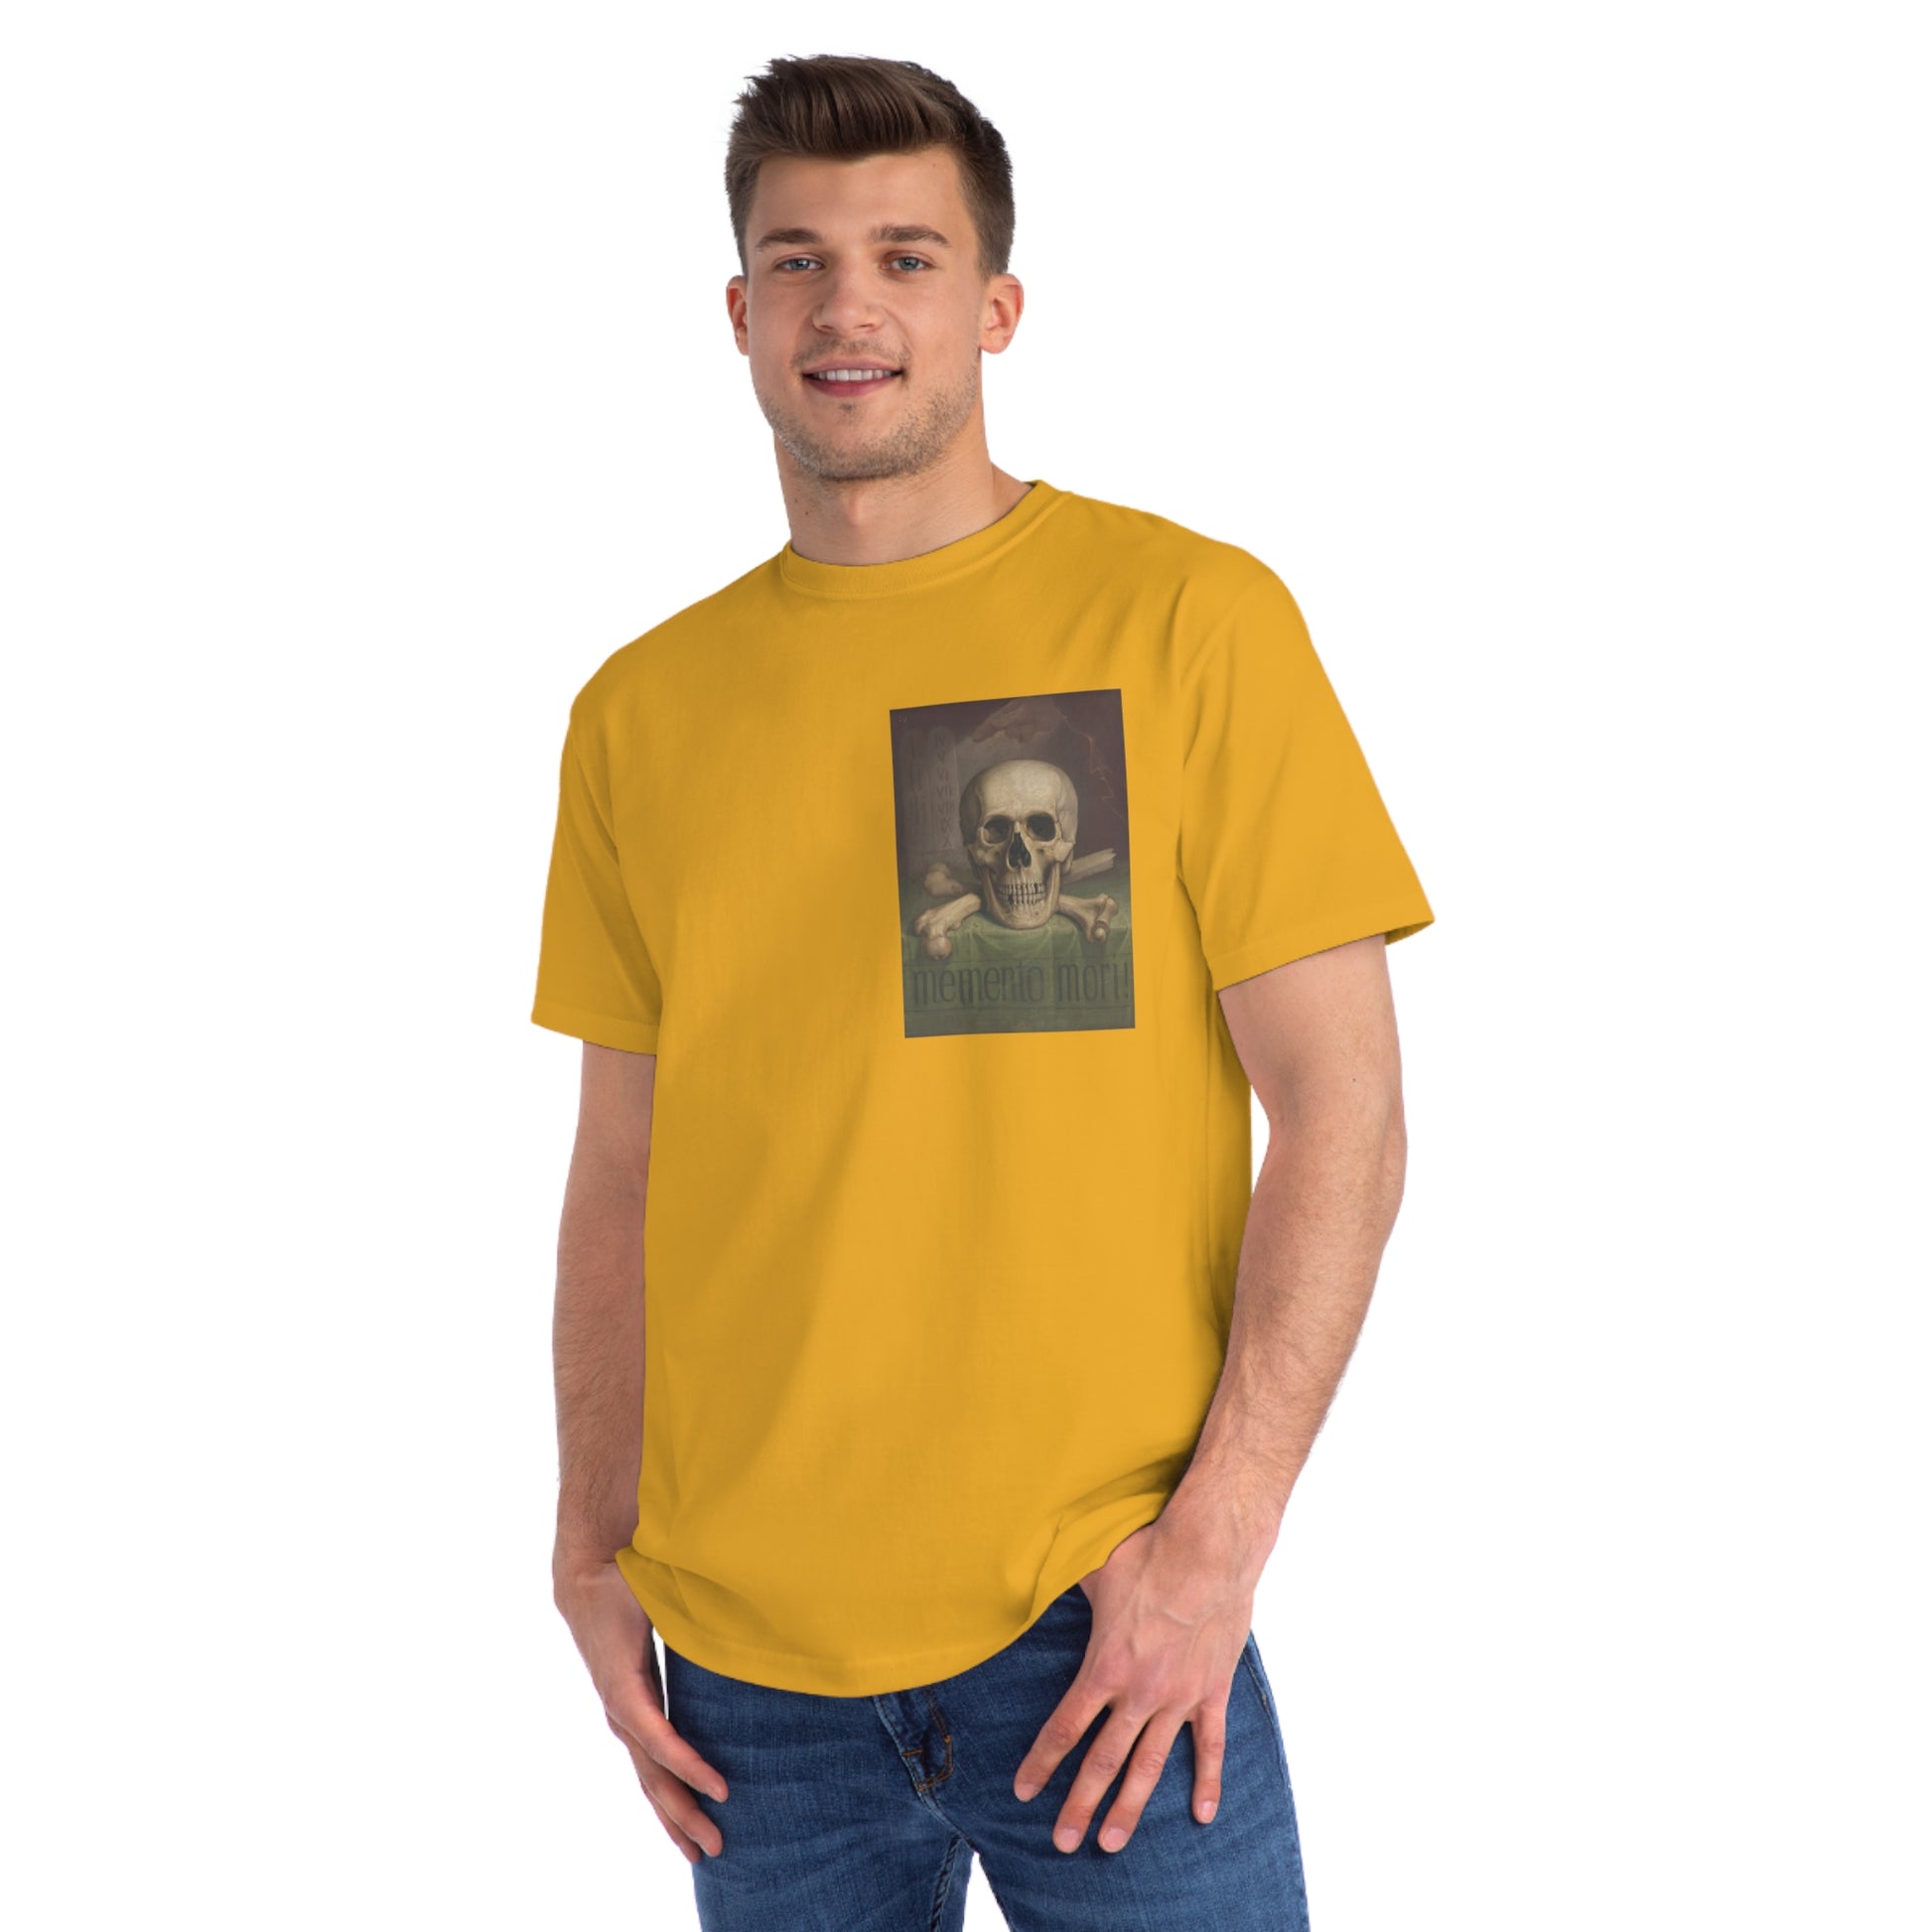 a man wearing a yellow t - shirt with a picture of a skull on it